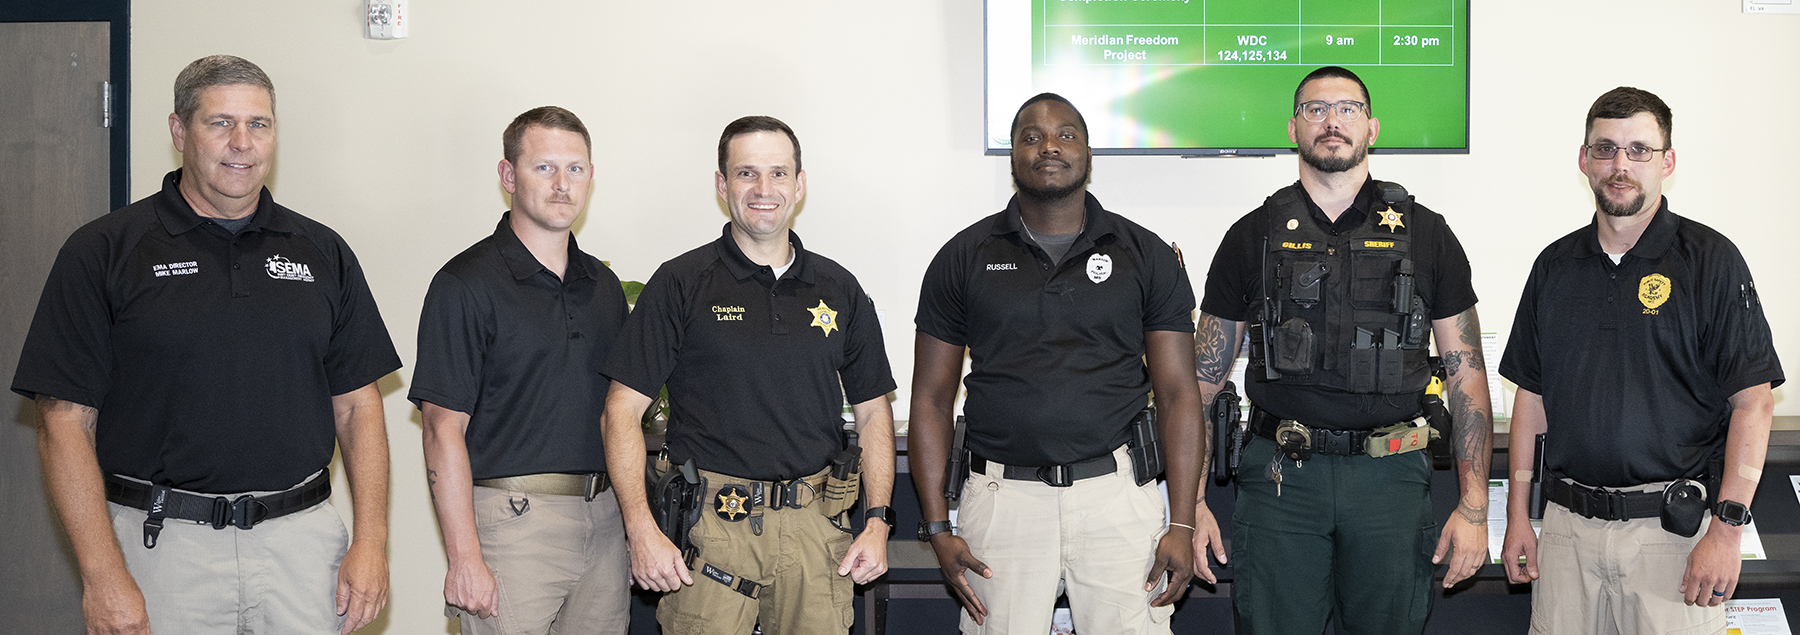 Graduates of MCC’s Meridian Public Safety Academy include Mike Marlow, left, Jonathan Colby Bishop, Thomas Ryan Laird, Kevin Demond Russell, Fabian J. Gillis and Edward A. Odom.